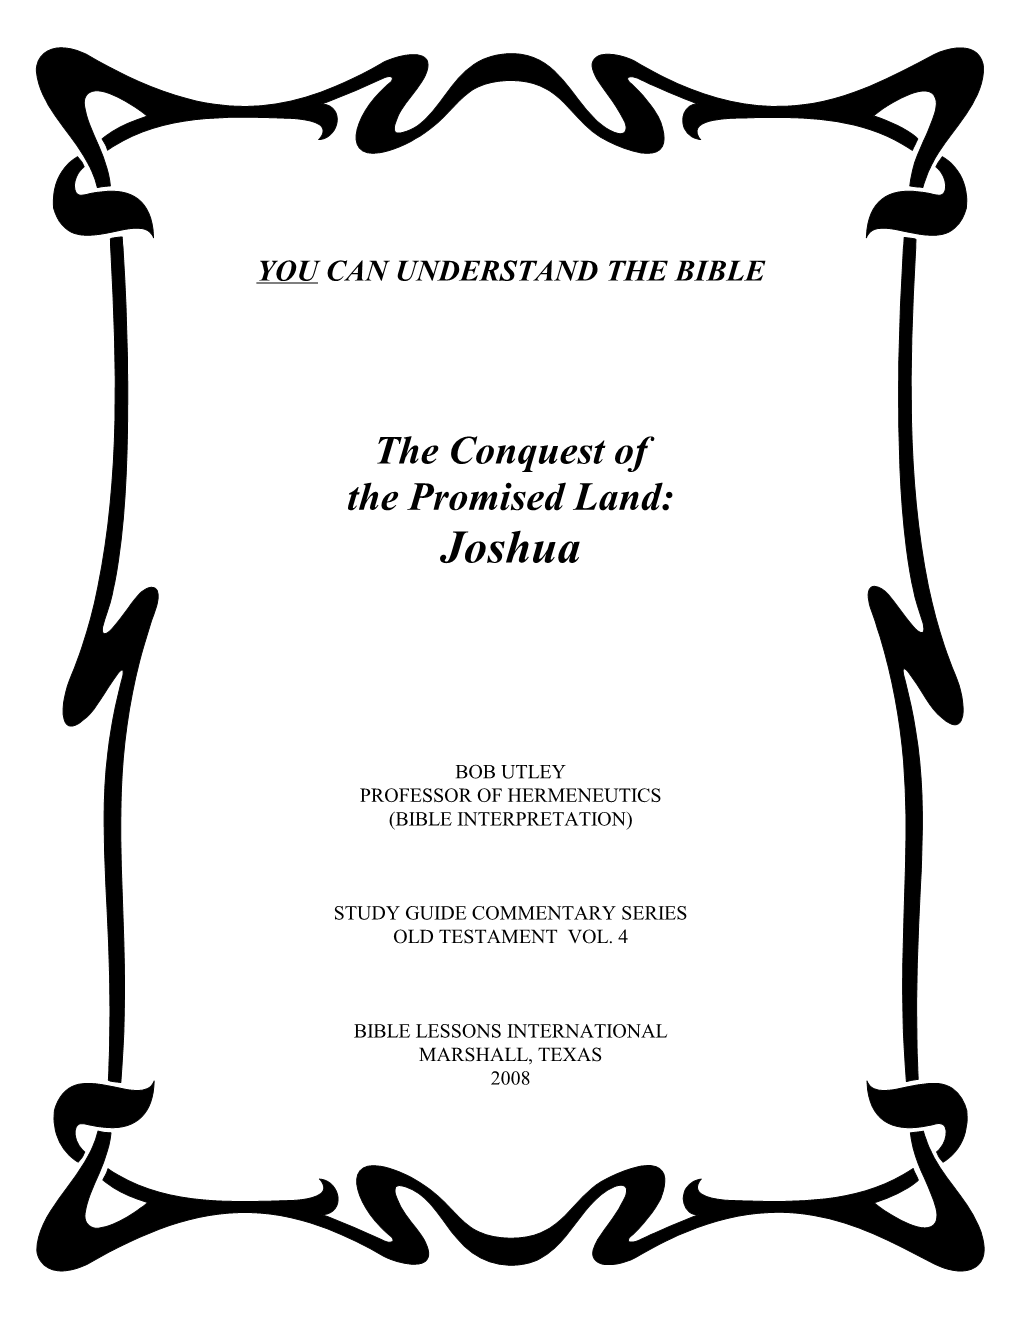 The Conquest of the Promised Land: Joshua